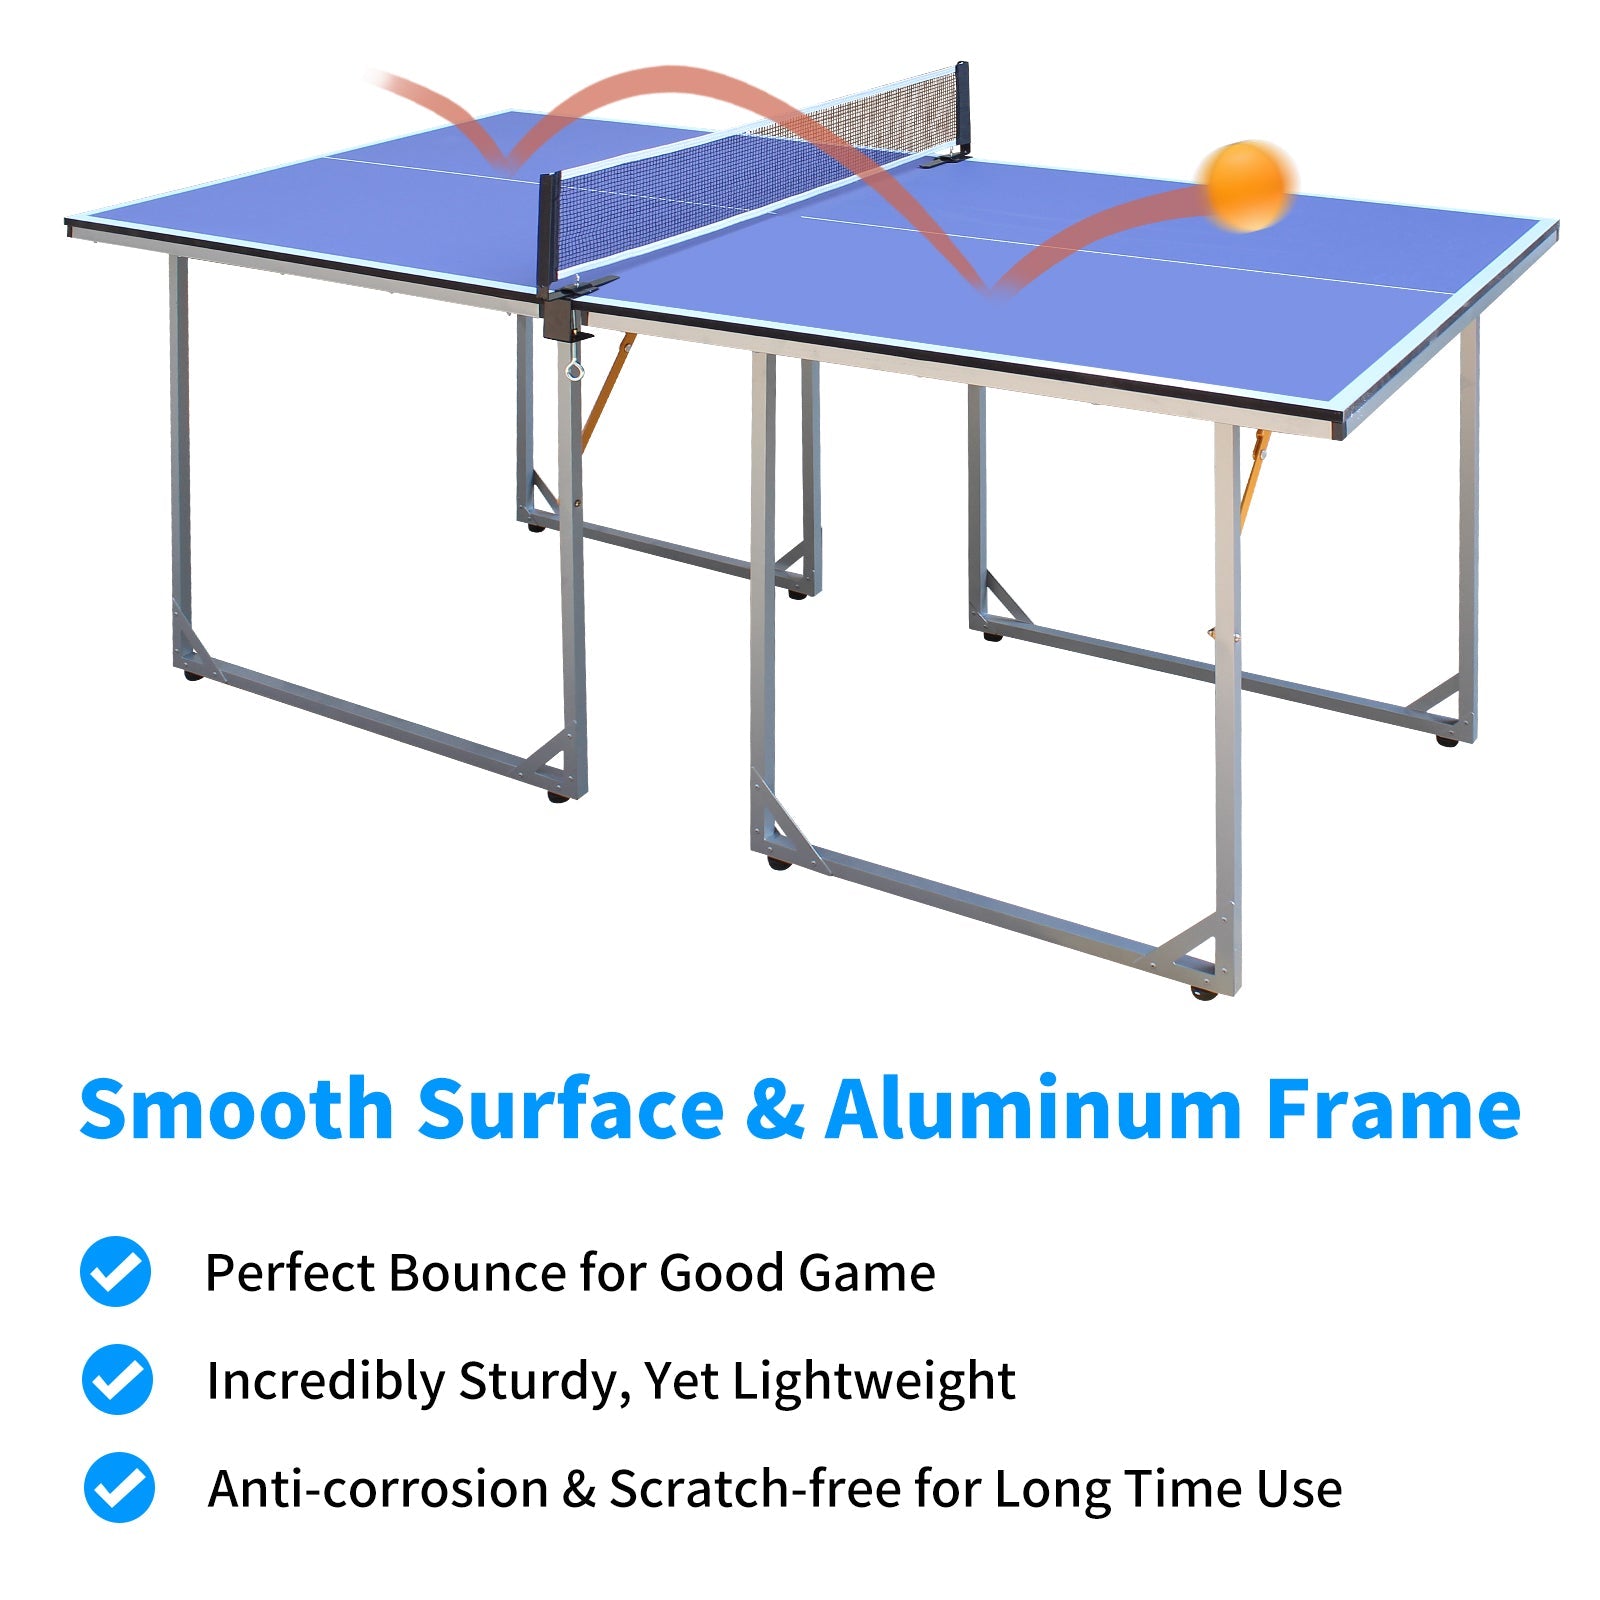 6ft Mid-Size Table Tennis Table Foldable & Portable Ping Pong Table Set for Indoor & Outdoor Games with Net - Free Shipping - Aurelia Clothing